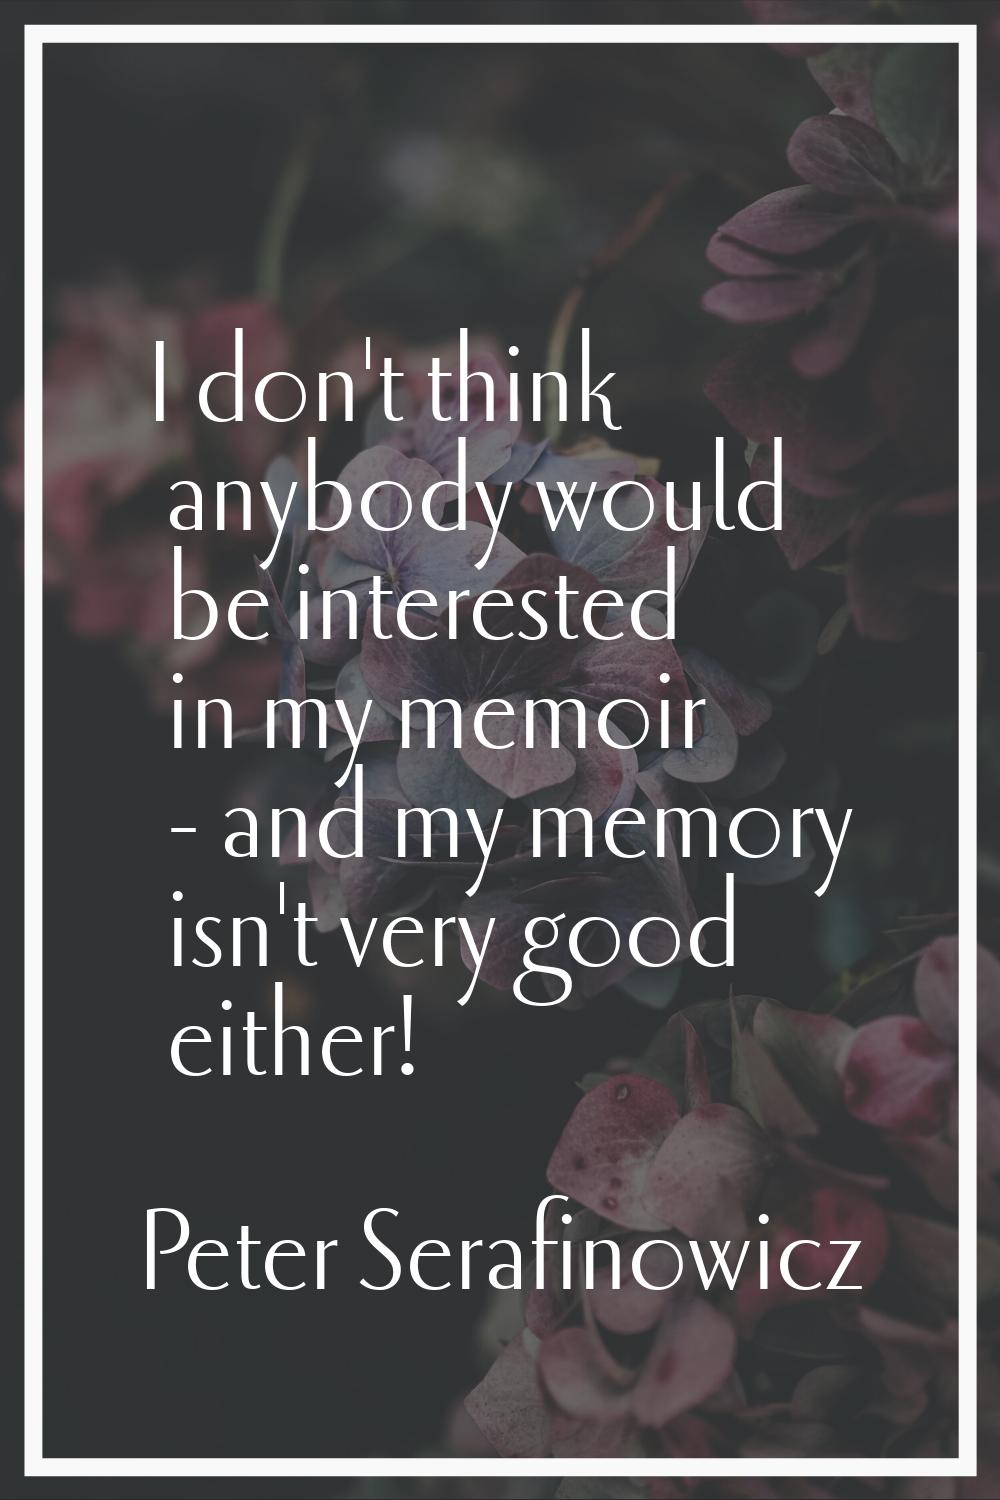 I don't think anybody would be interested in my memoir - and my memory isn't very good either!